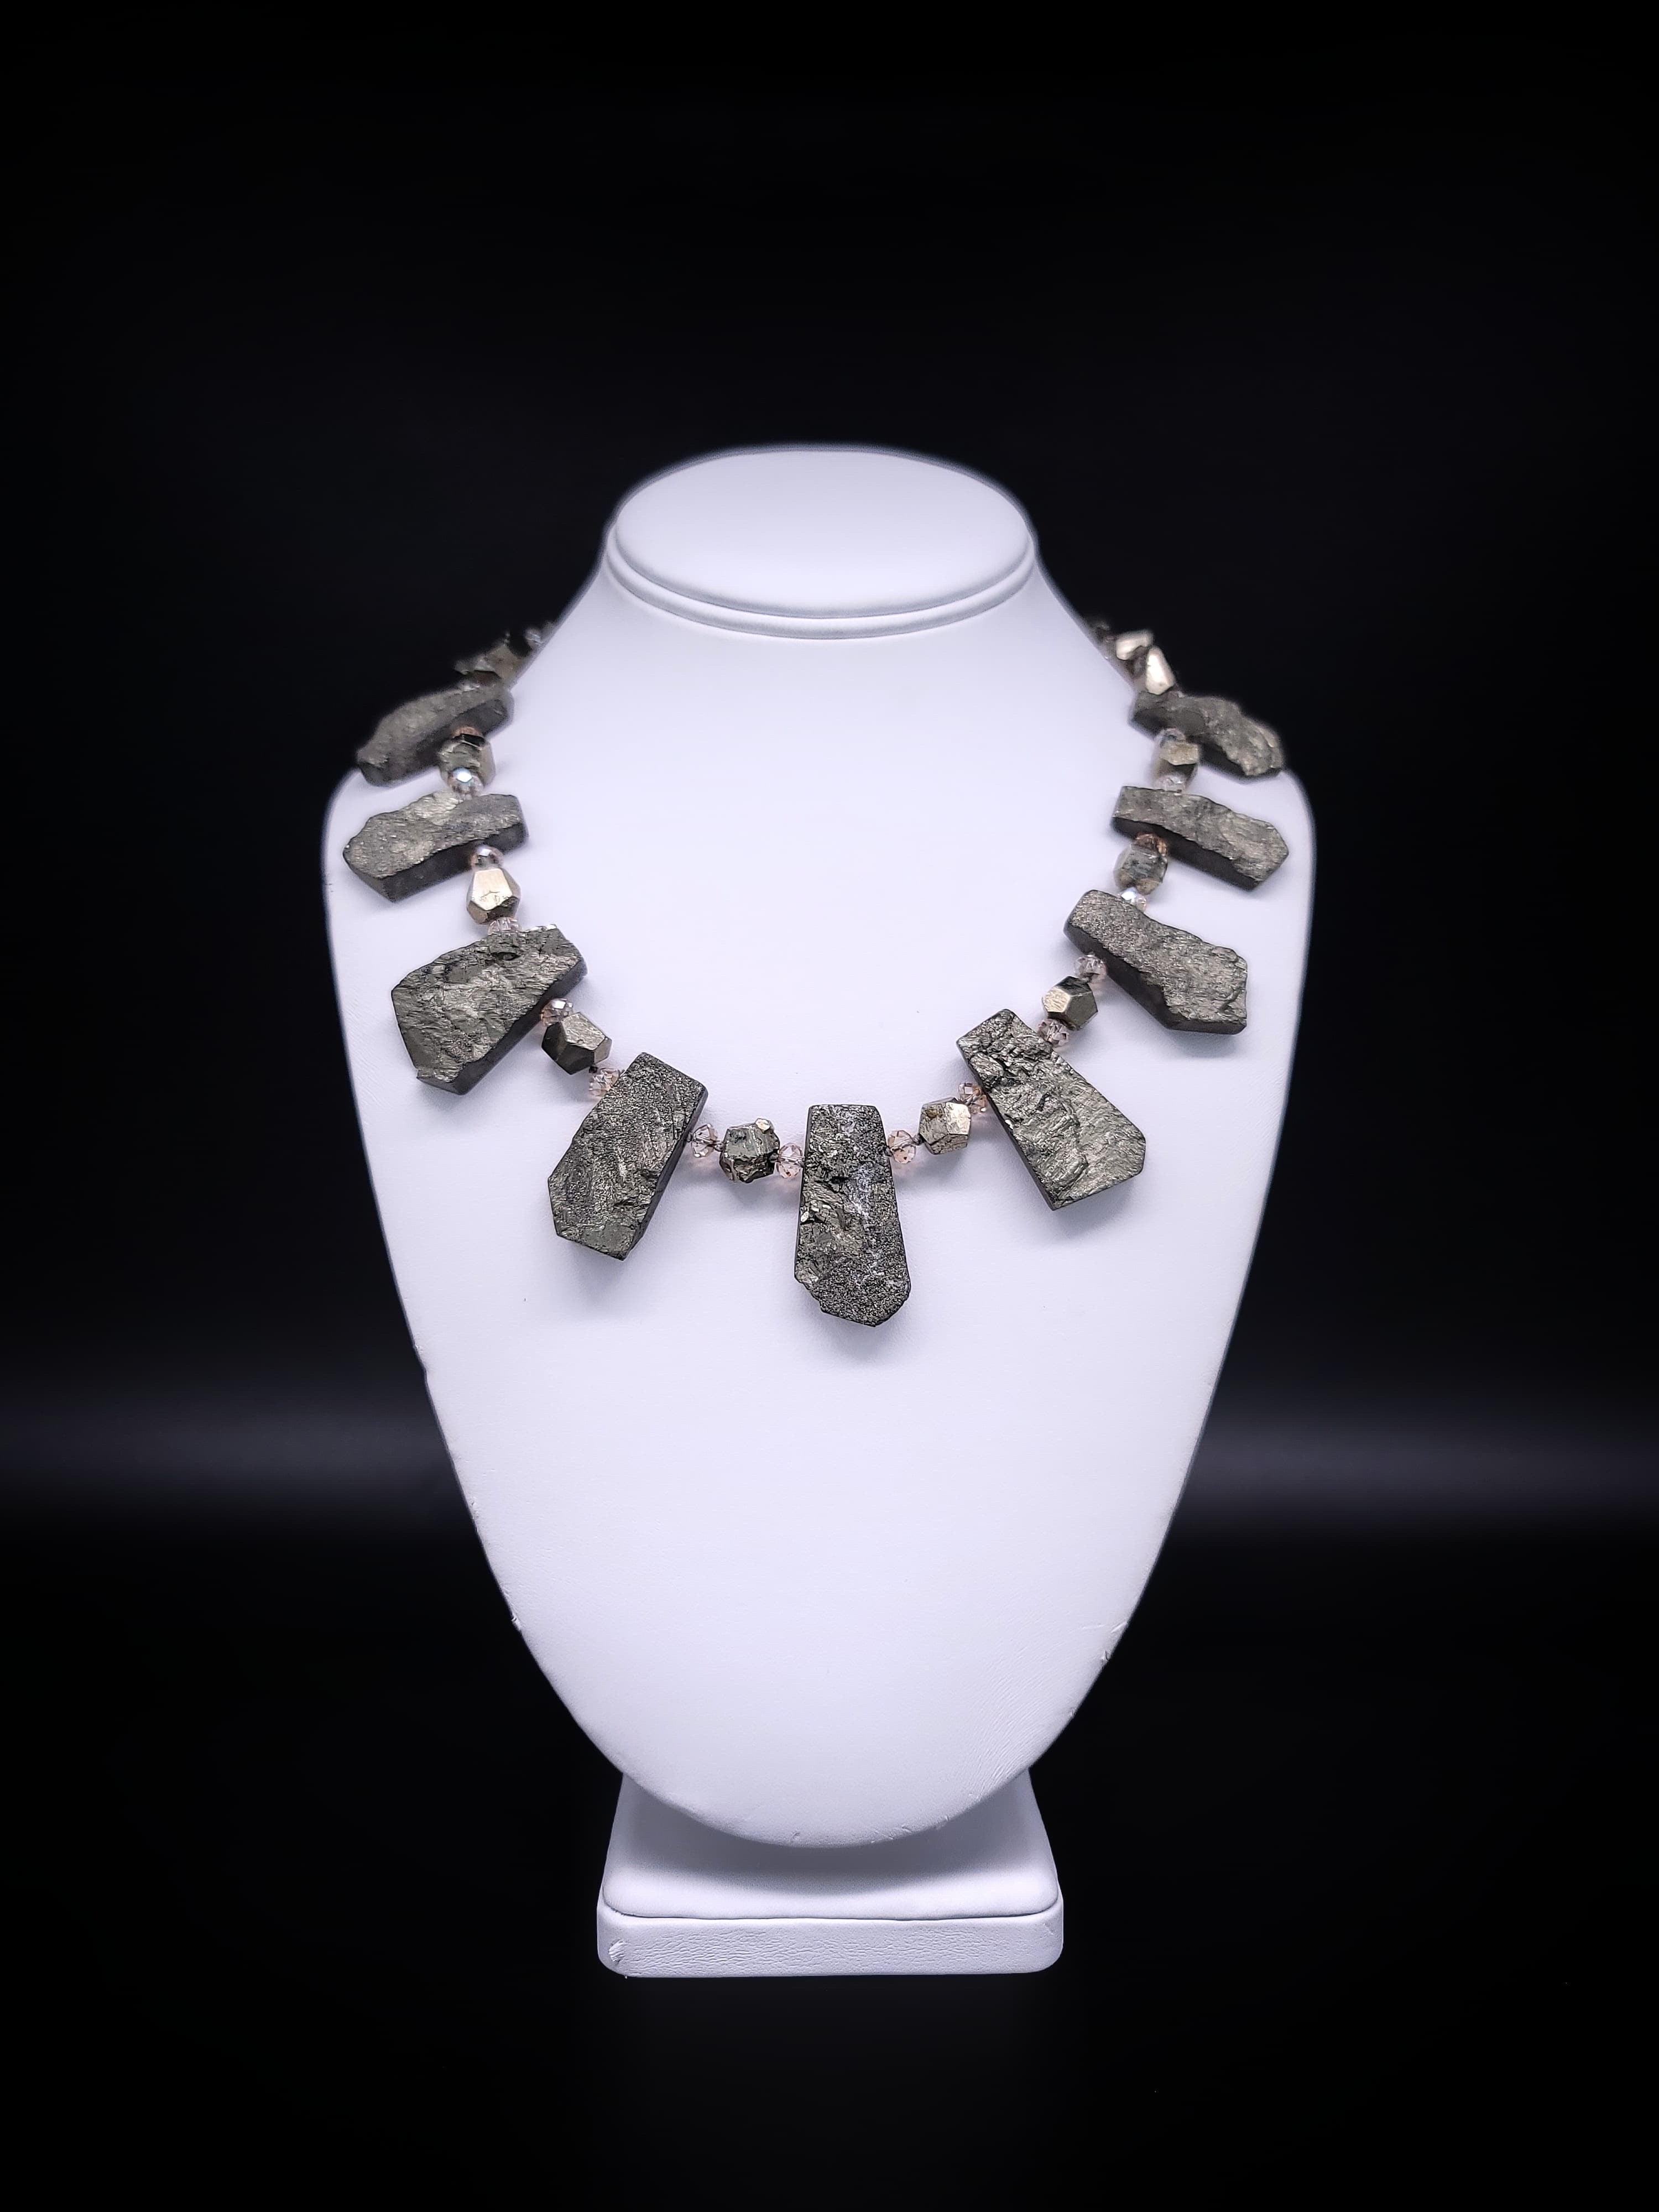 A.Jeschel Pyrite Necklace proving that all that glitters is not gold.